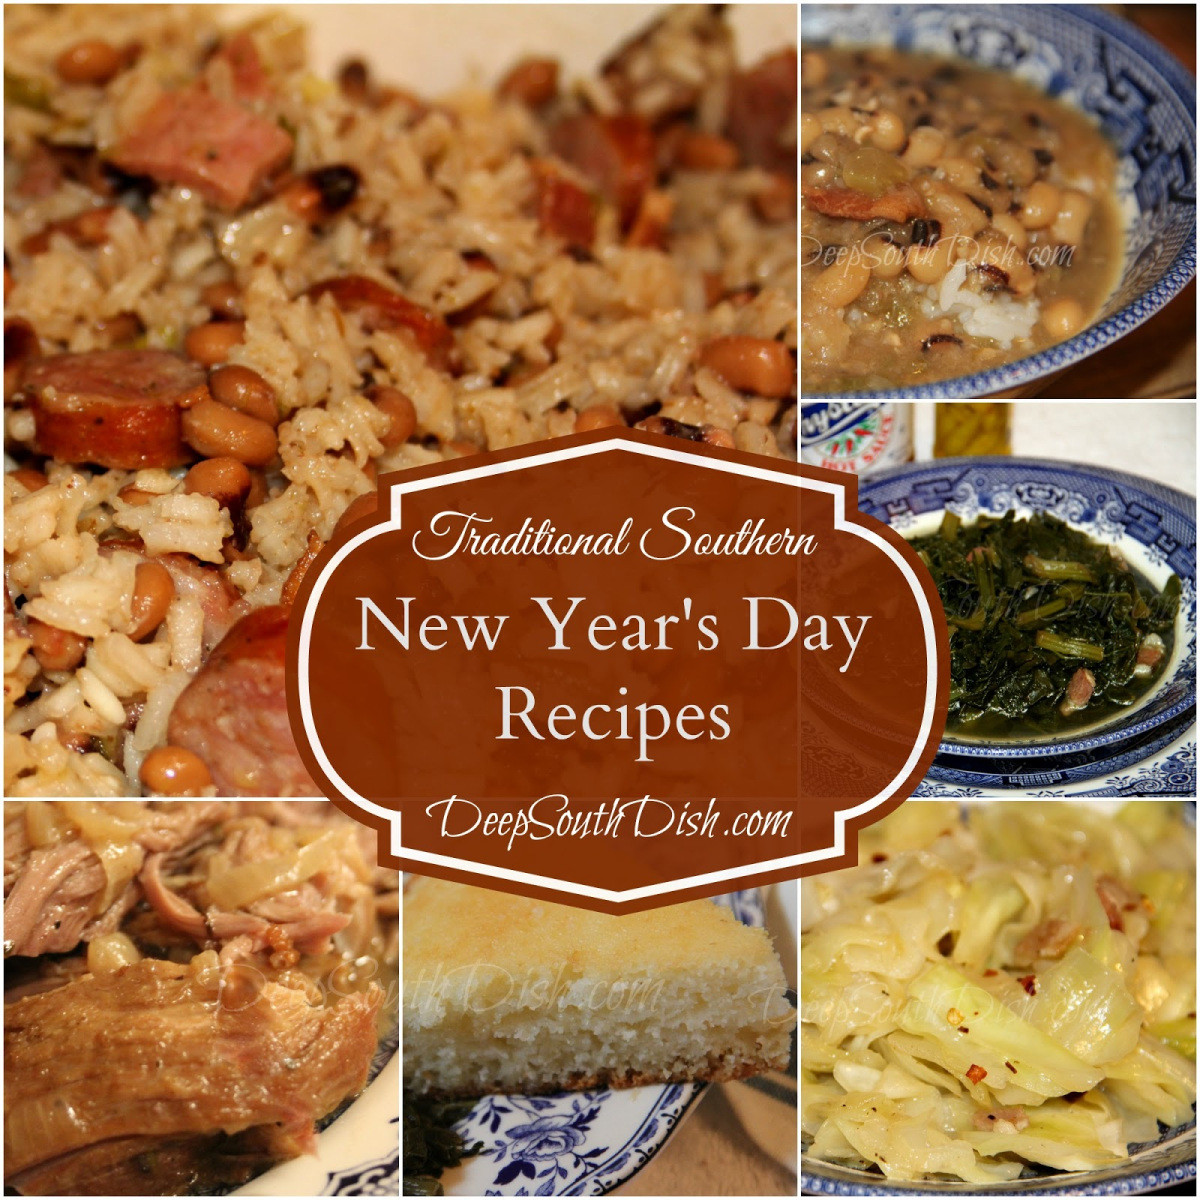 New Years Dinner Recipies
 PSA from CBT – New Year’s Day Food for the Residents of